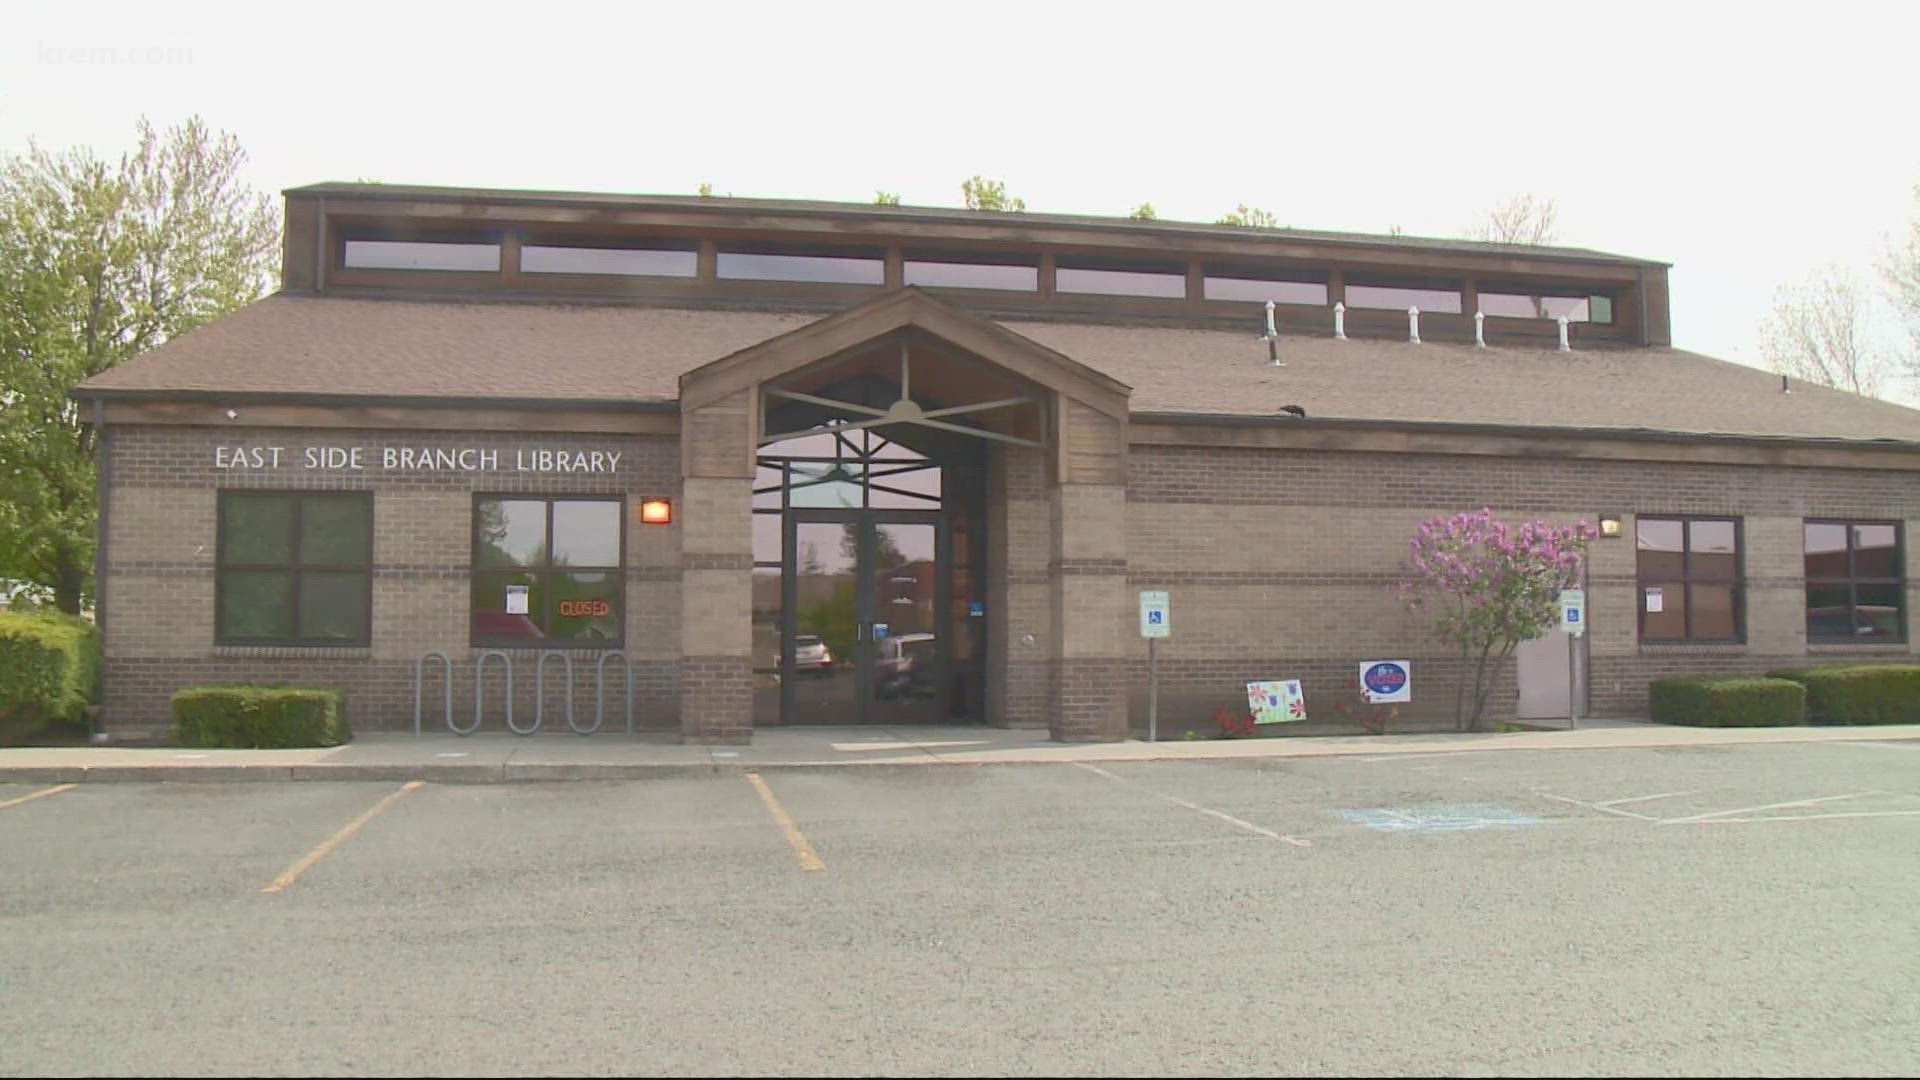 On Tuesday, the City of Spokane hosted a press conference to announce a proposal to use the former East Central Library building as a new police precinct.